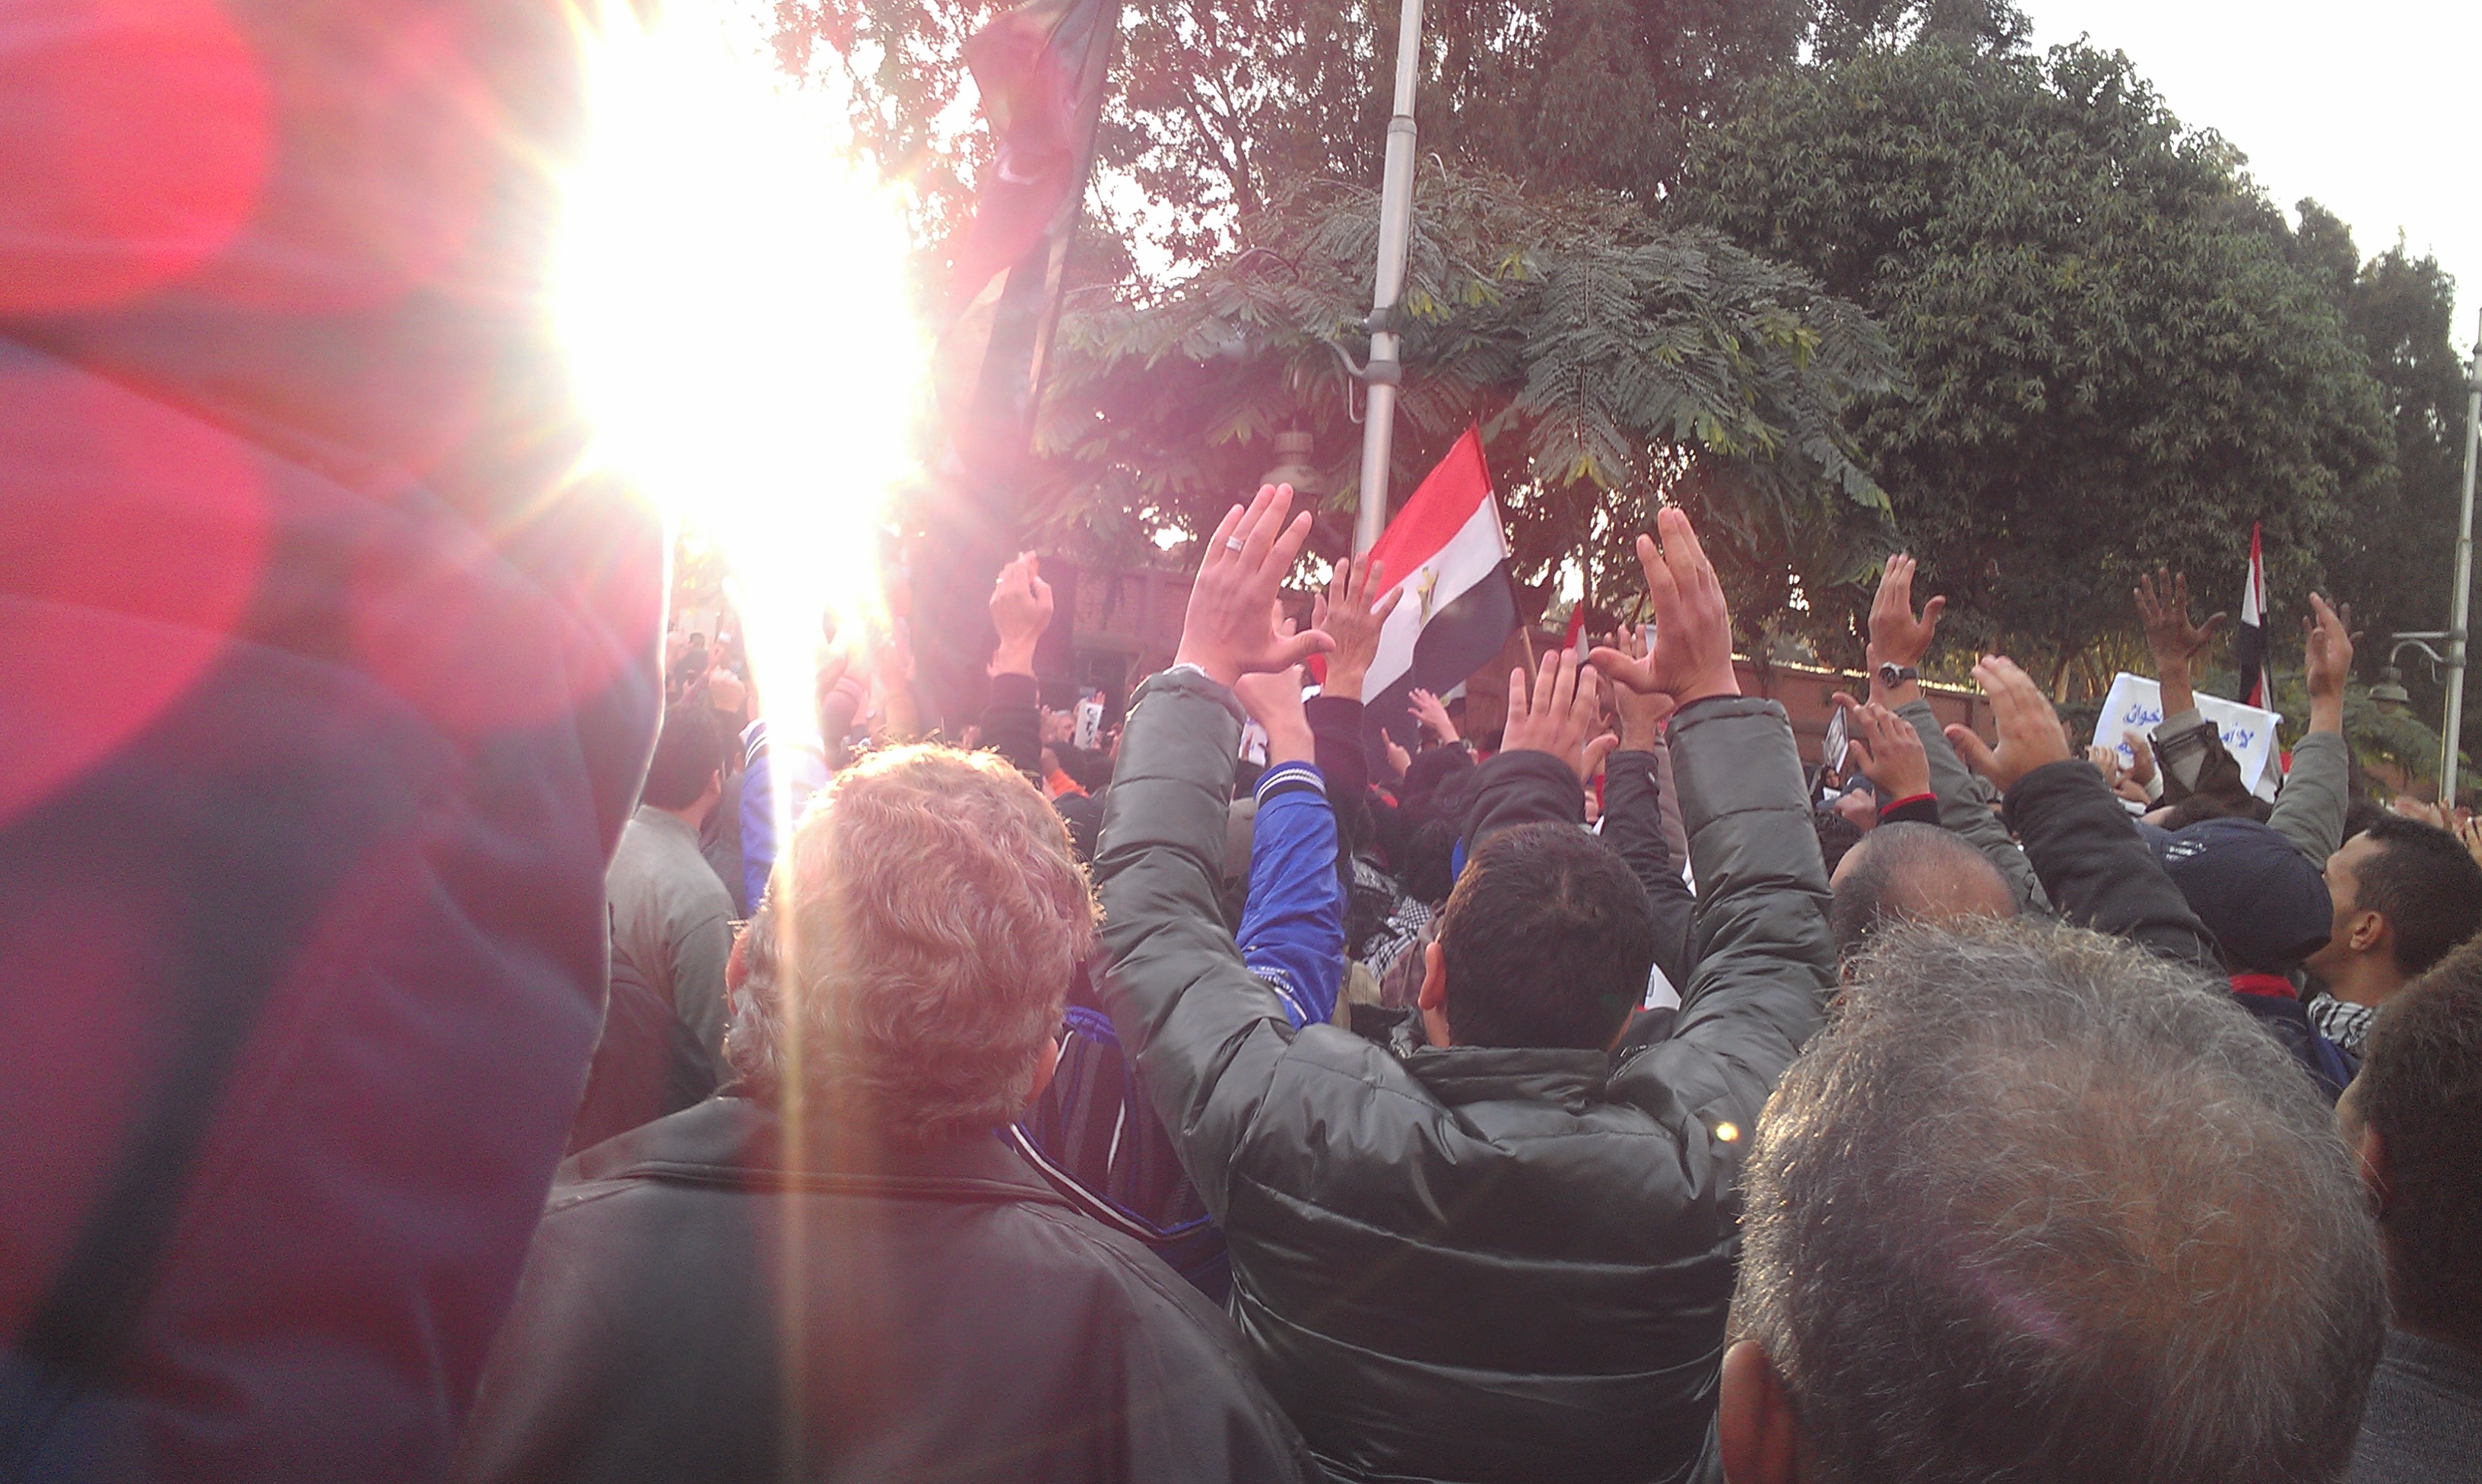 Before the clashes: many gathered outside the Presidential Palace calling for the ouster of Morsi.